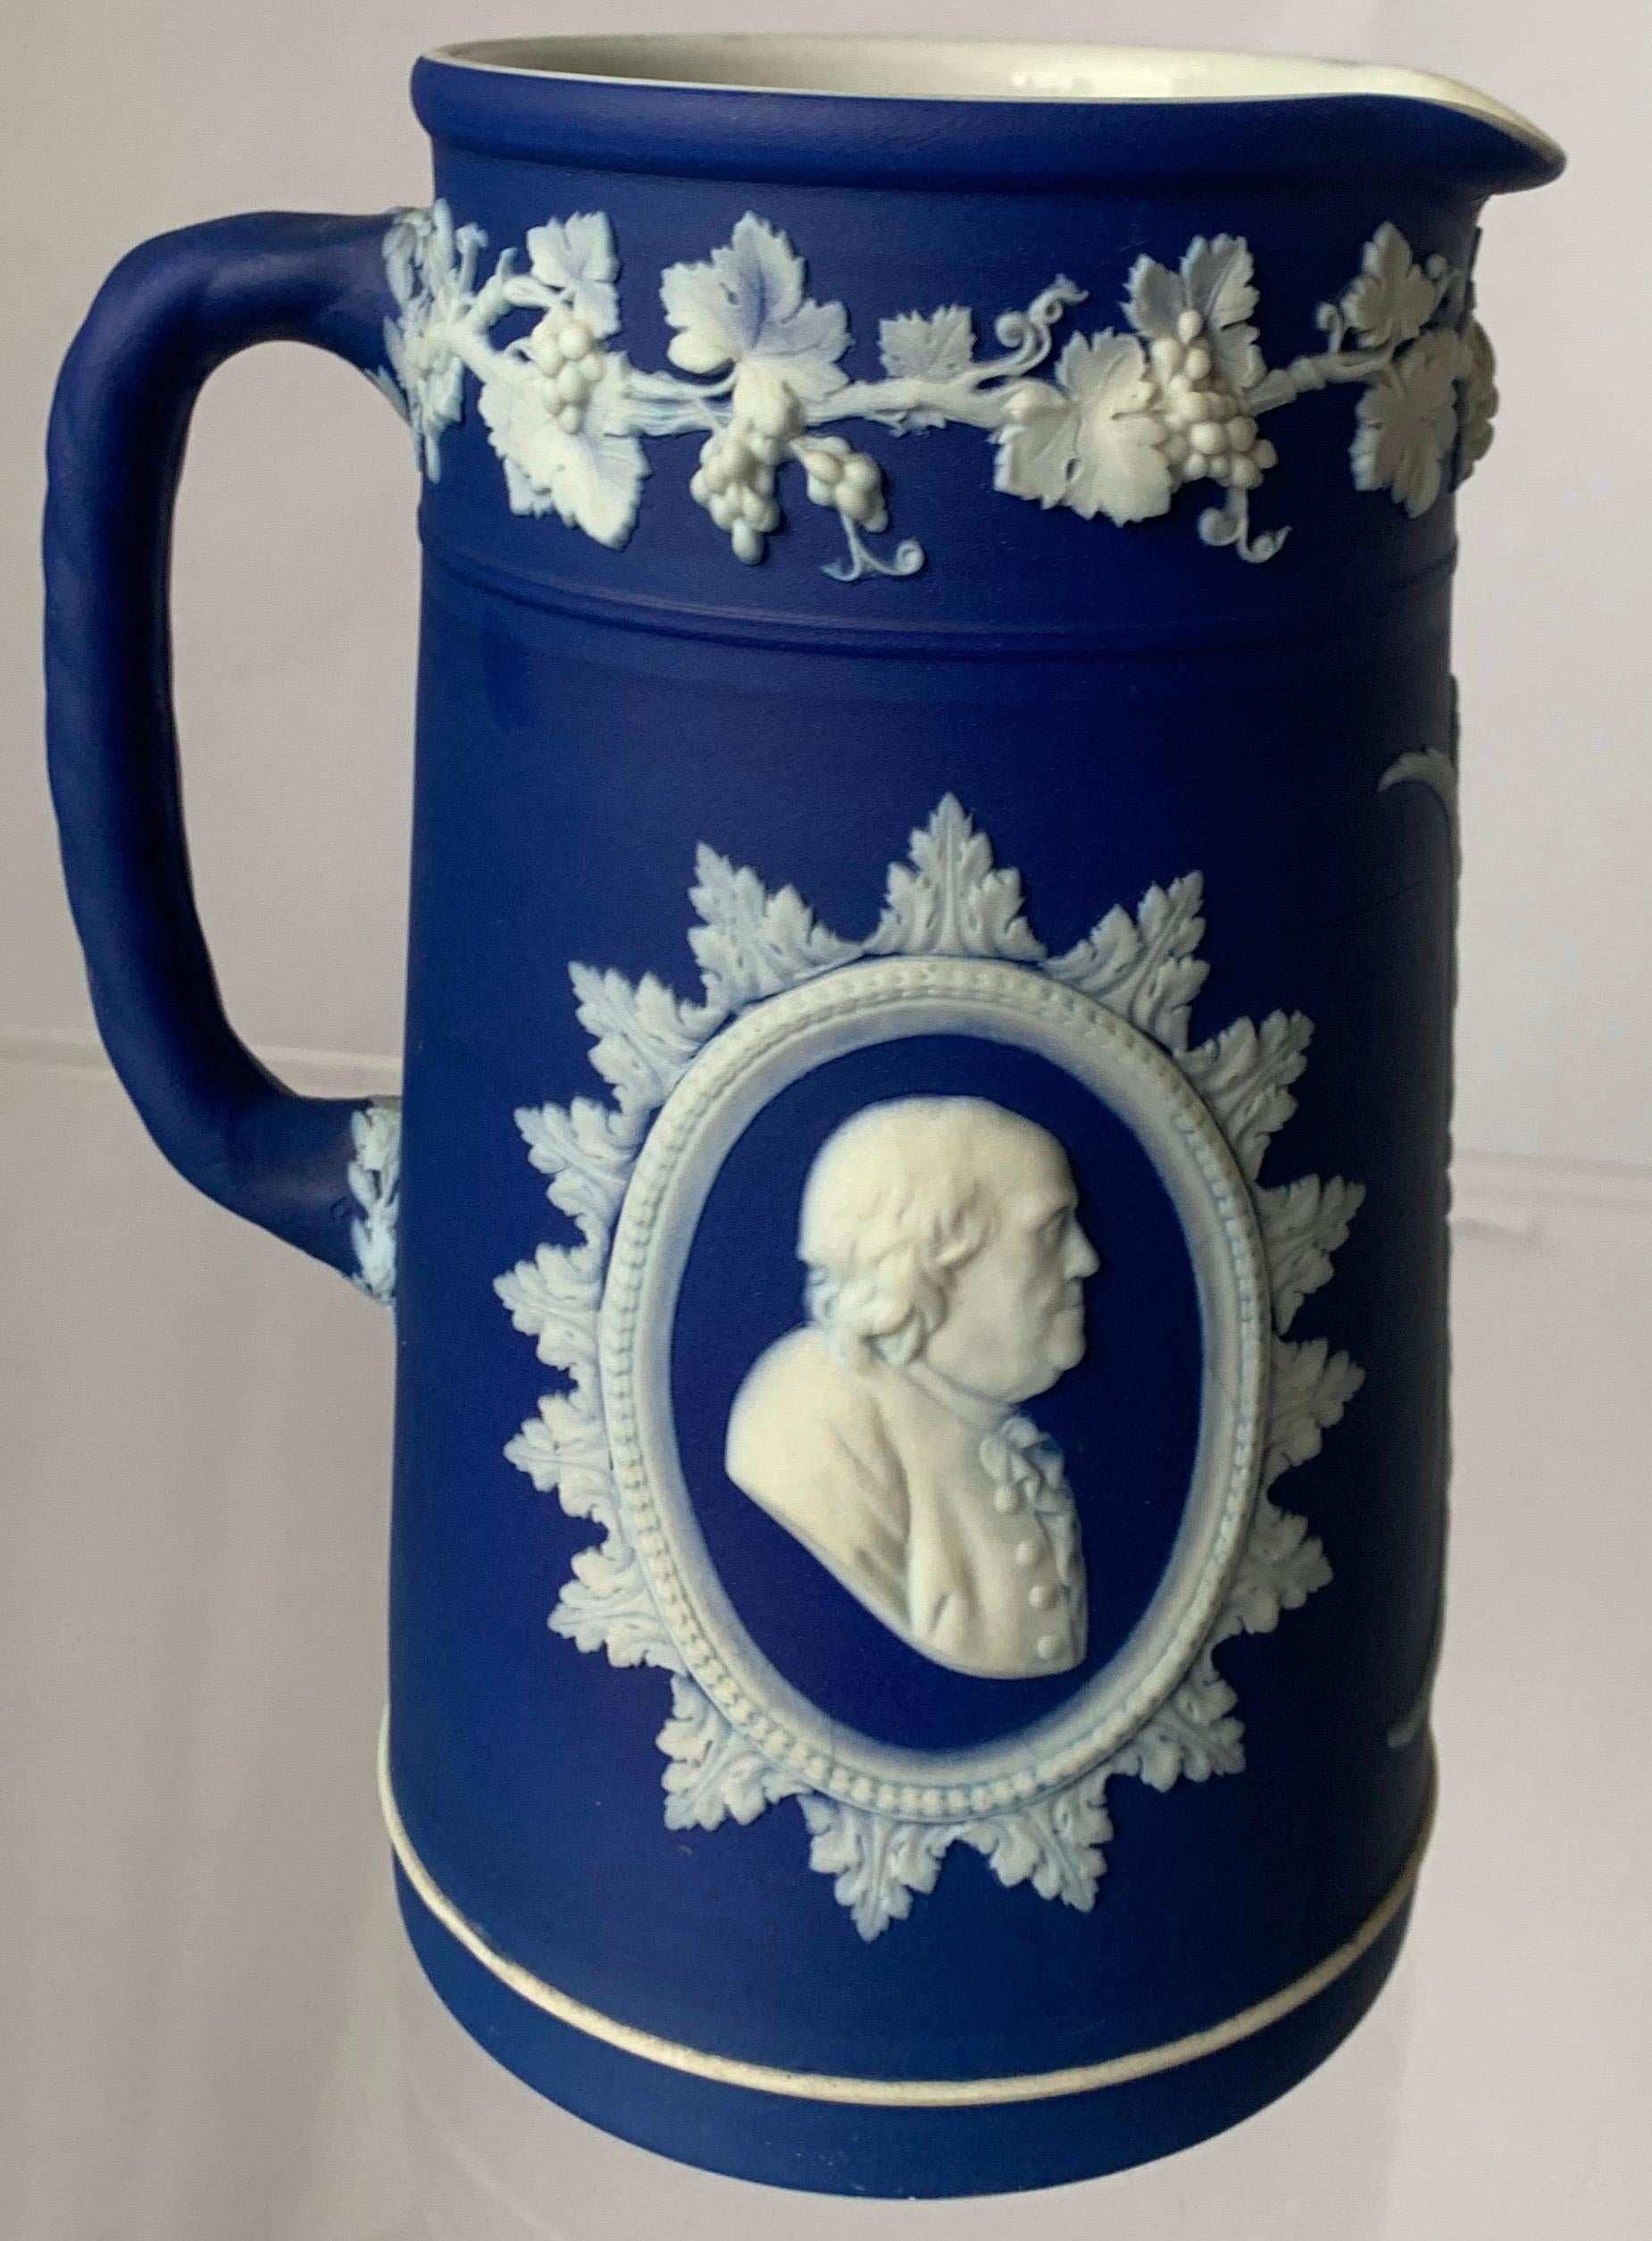 Wedgwood dark blue jasperware tall pitcher featuring neoclassical motif with Founding Fathers Thomas Jefferson and Benjamin Franklin cameos. Inside of the pitcher is glazed. Stamped Wedgwood England on the underside.